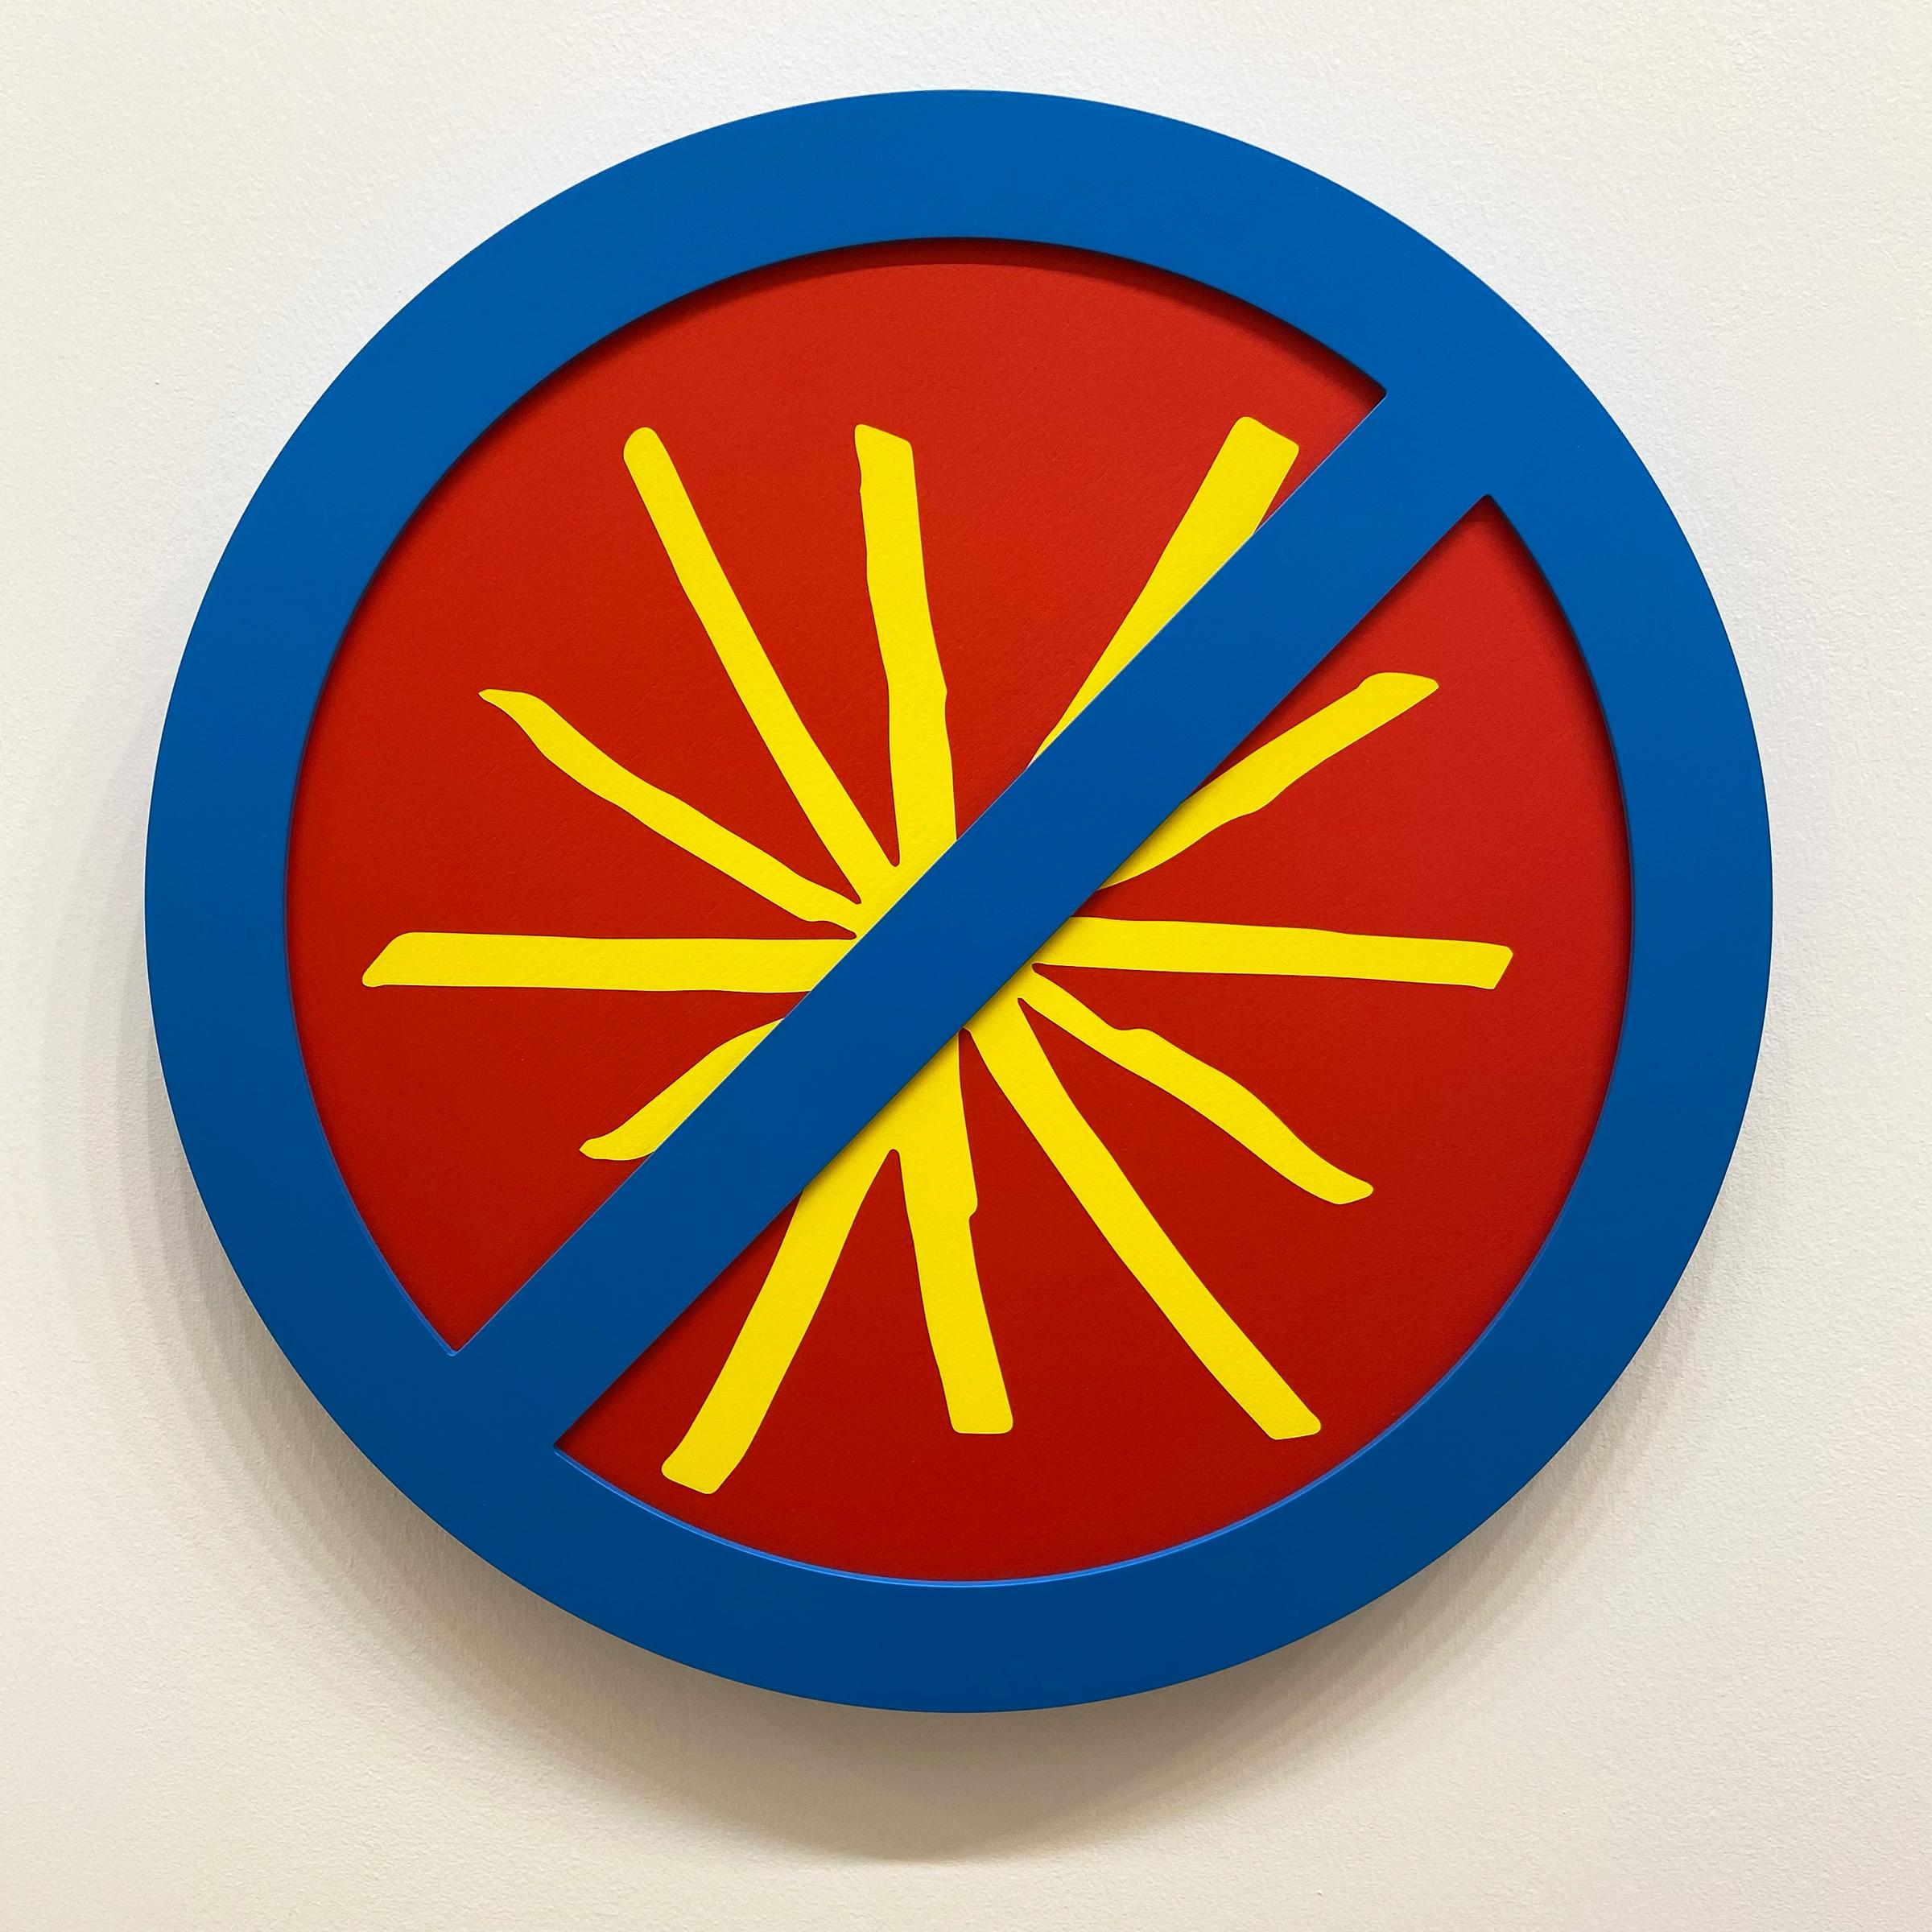 Michael Porten Portrait Painting - "No Assholes (Yellow on Red)" conceptual art, wall sculpture - Lawrence Weiner